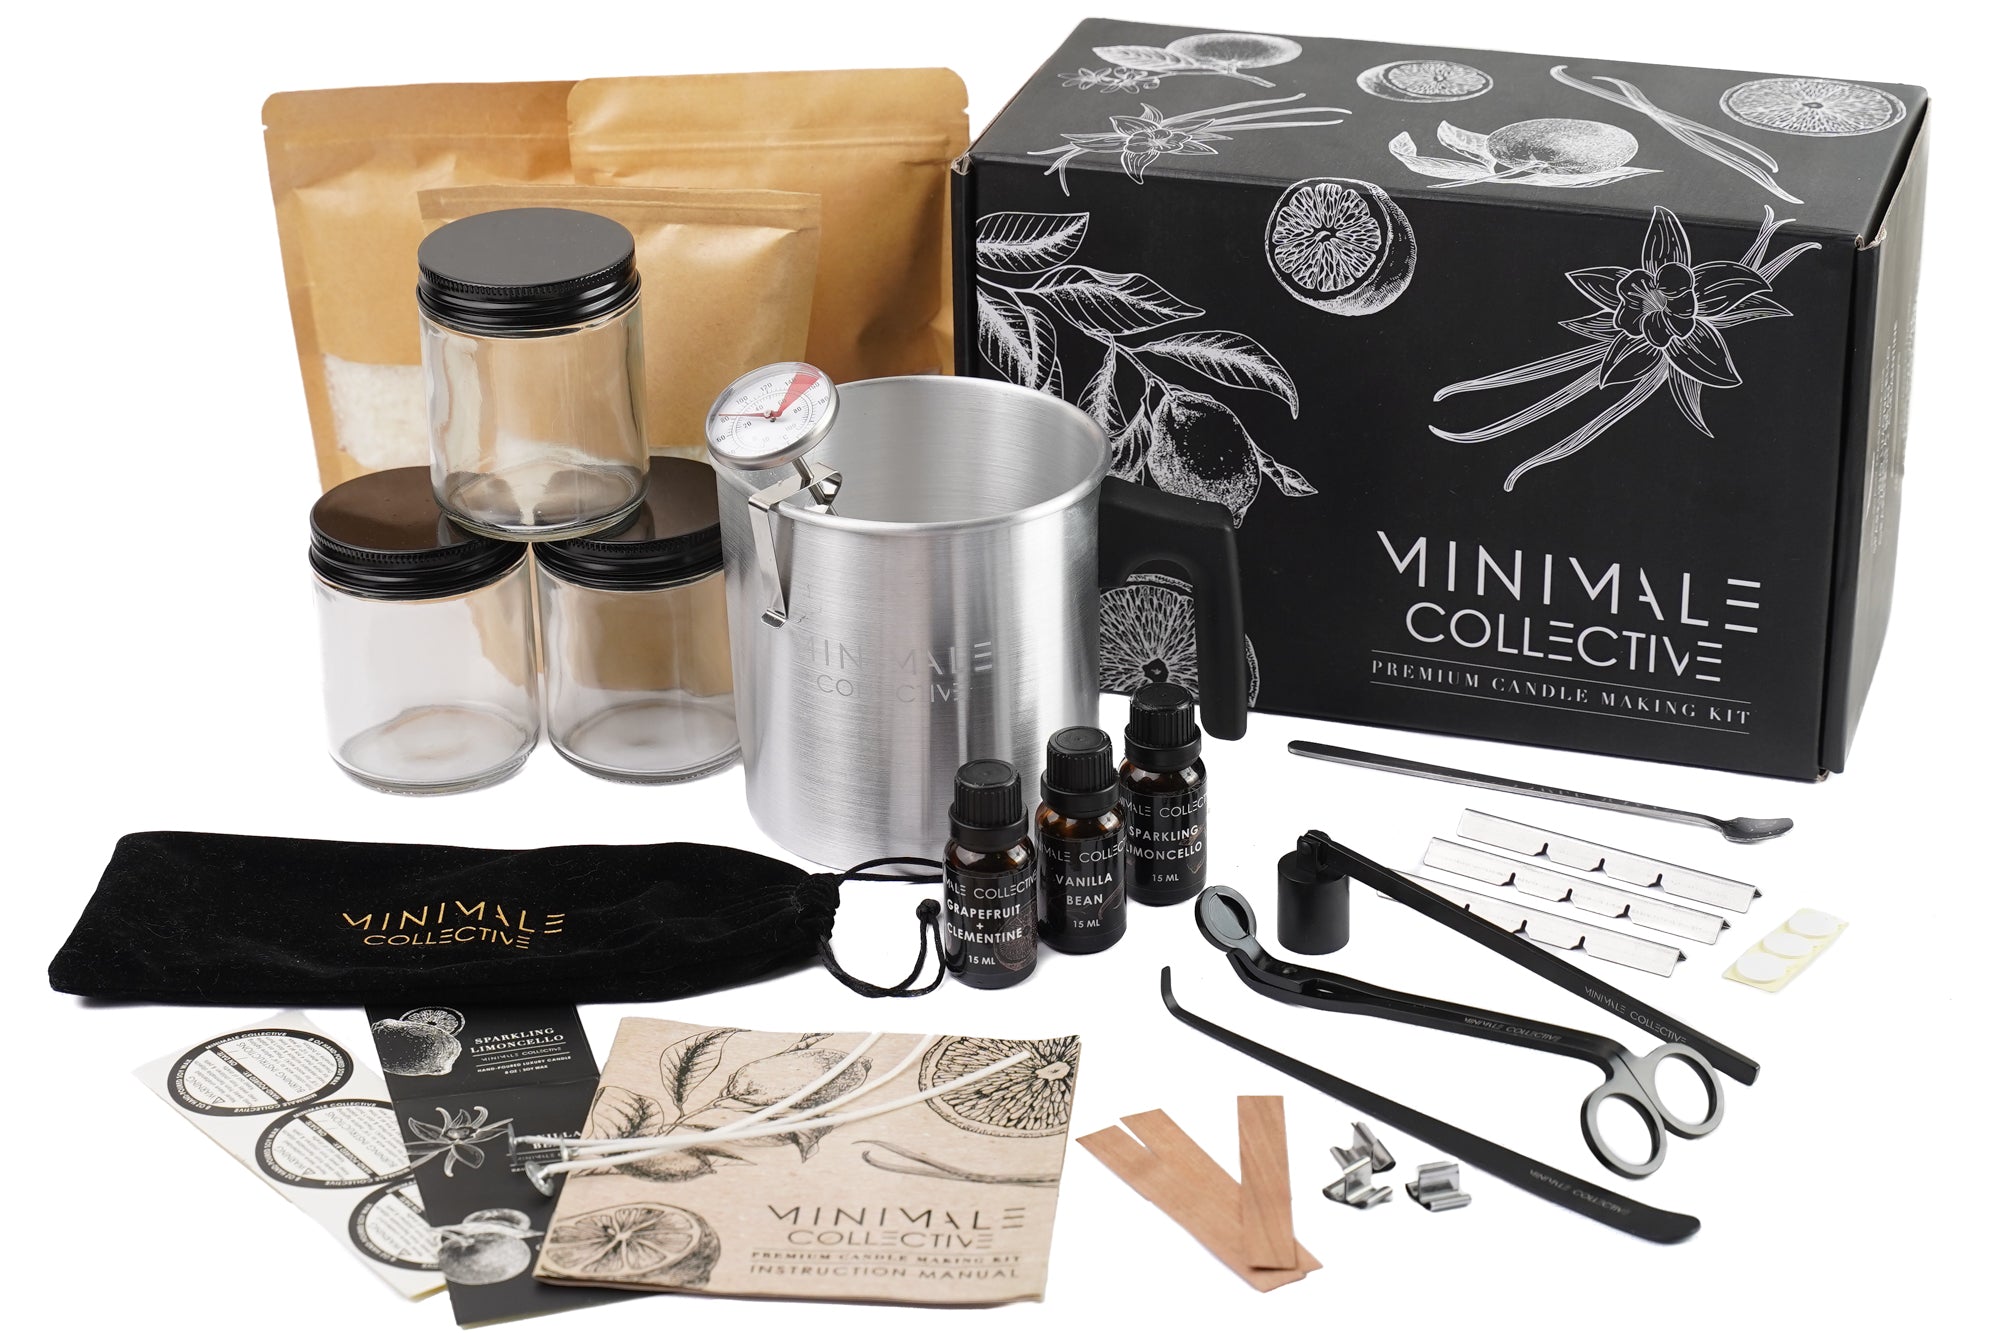 Premium Candle Making Kit - Minimale Collective